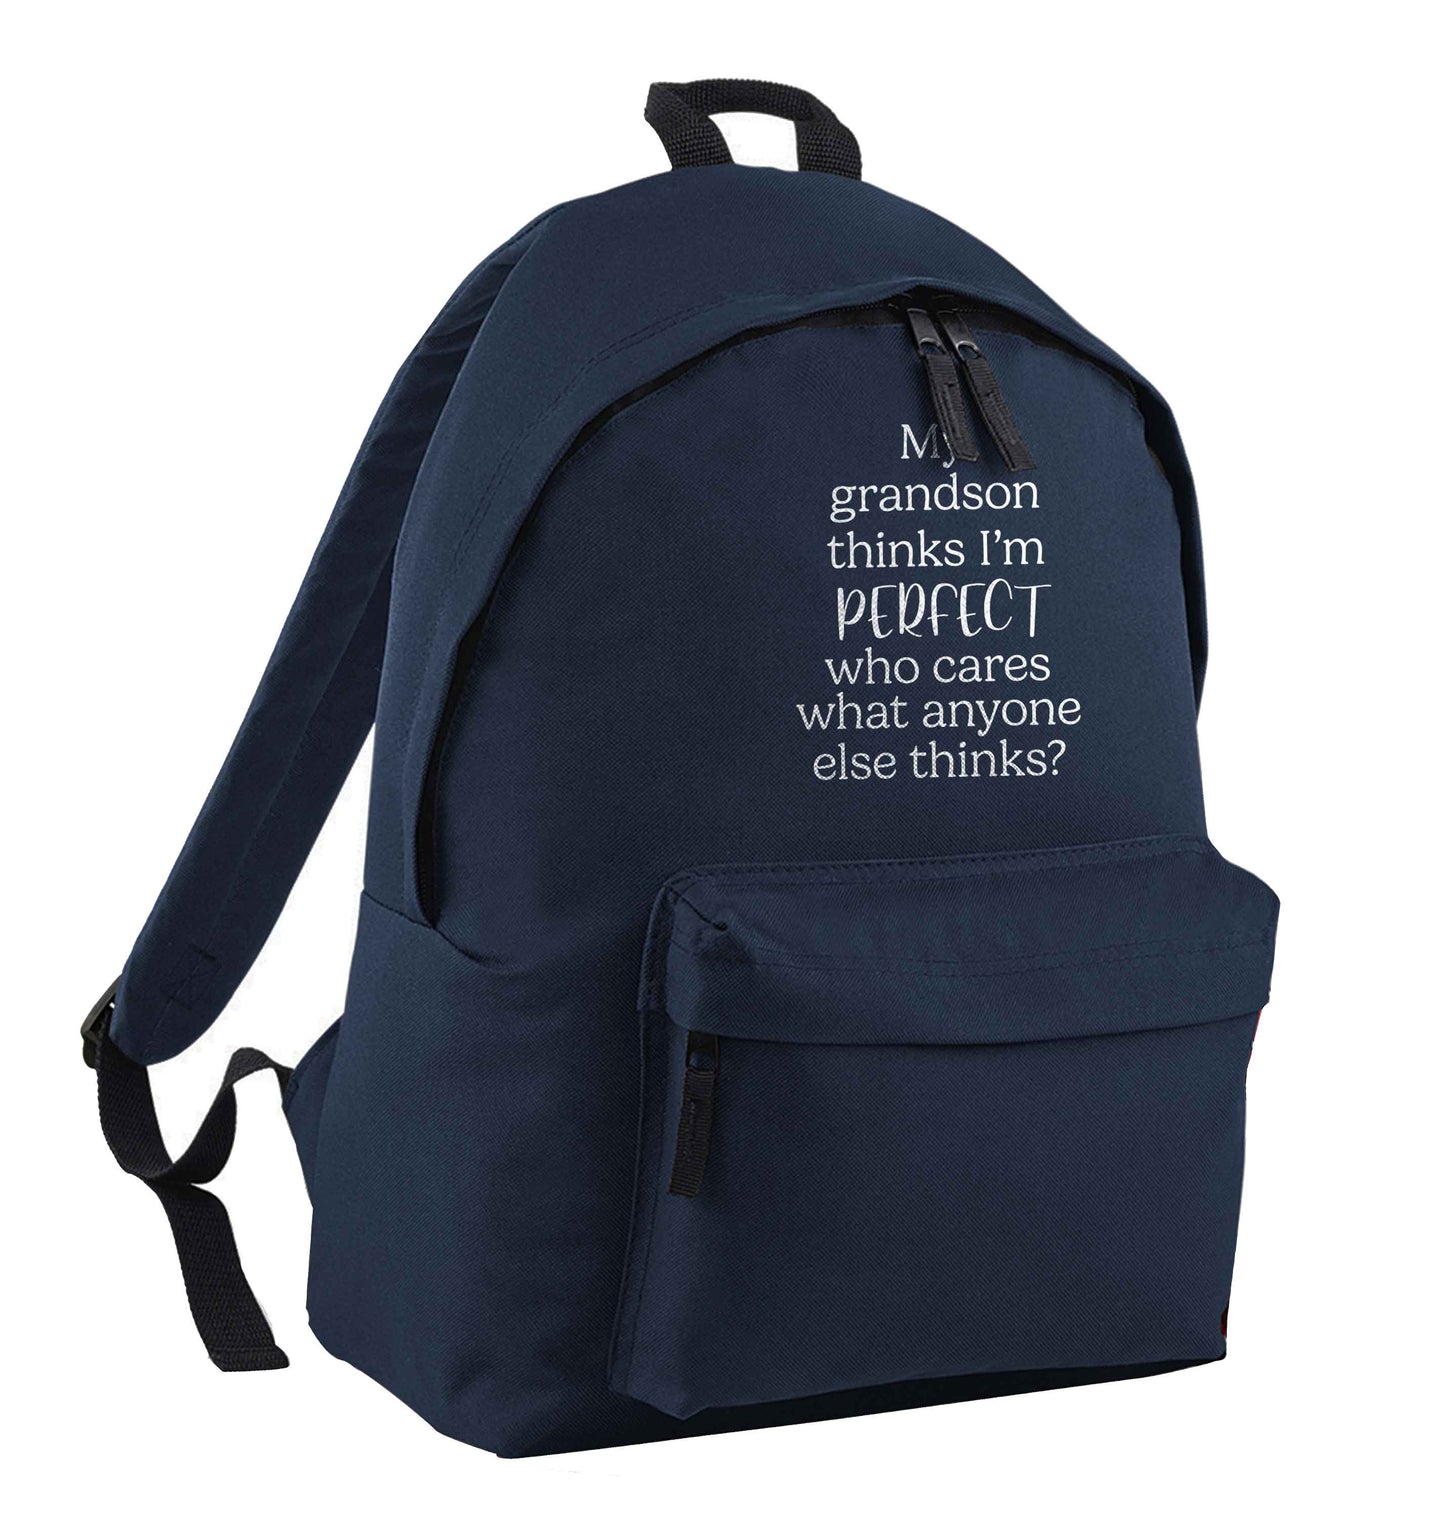 My grandson thinks I'm perfect navy adults backpack